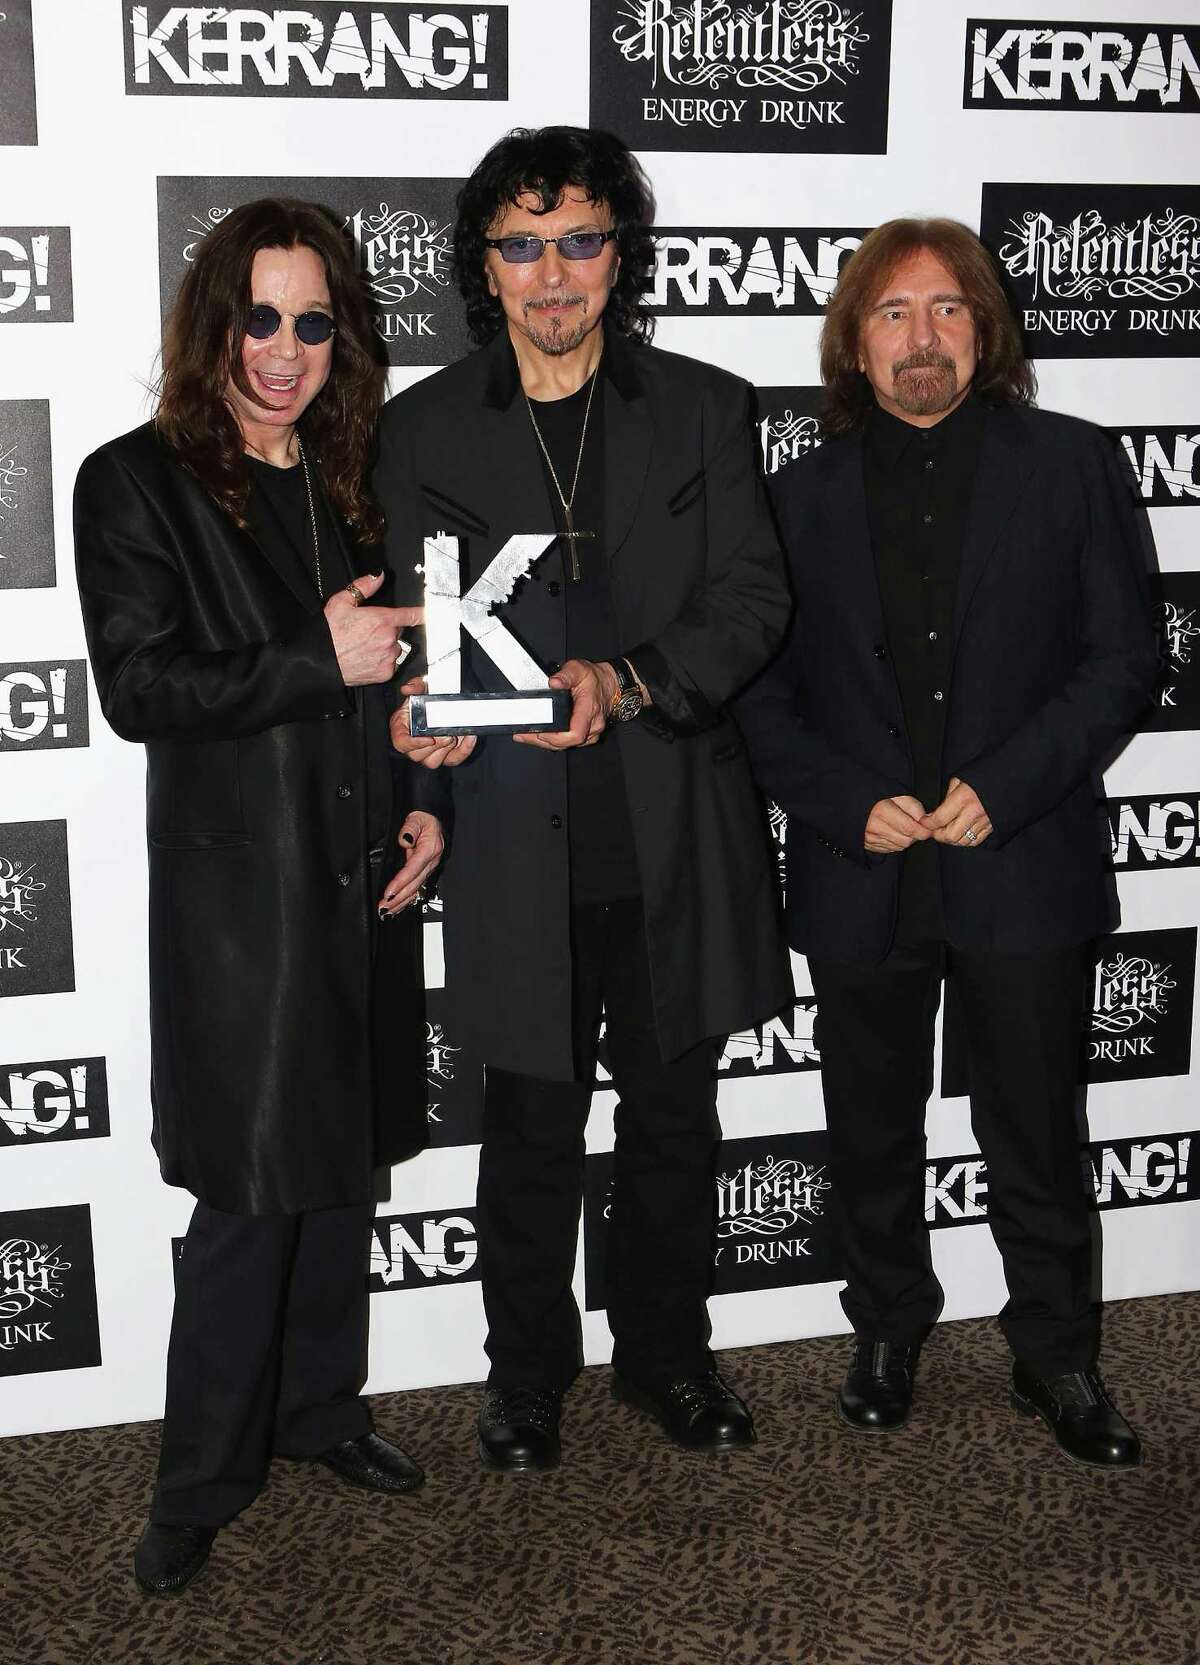 Ozzy Osbourne, Tony Iommi and Geezer Butler of Black Sabbath with their Inspiration Award during the Kerrang! Awards at The Brewery on June 7, 2012 in London, England.